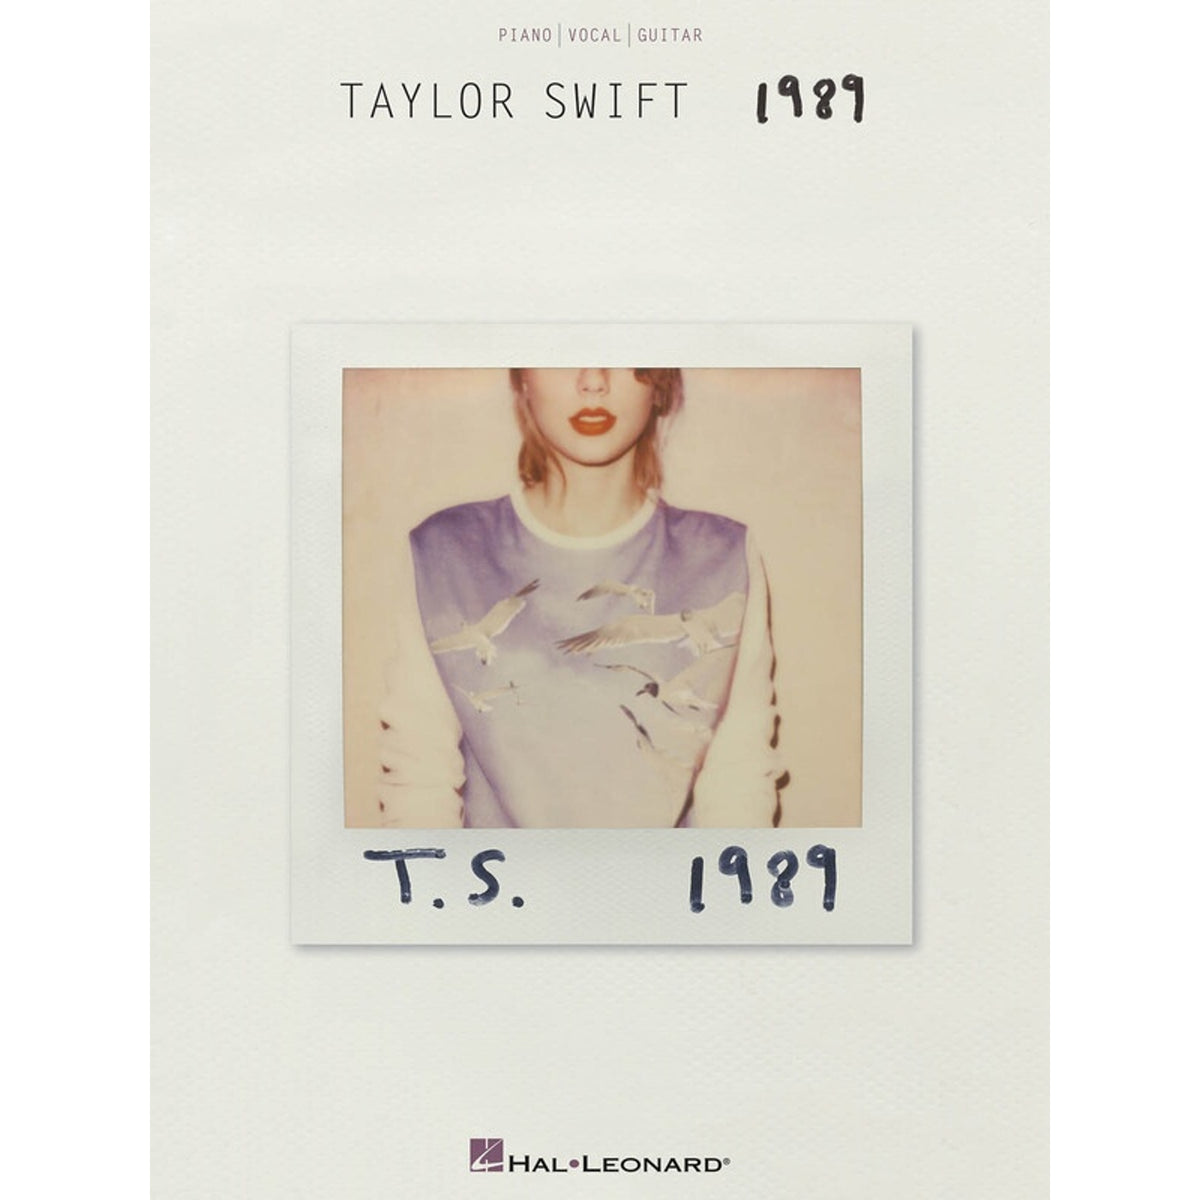 Taylor Swift 1989 Songbook